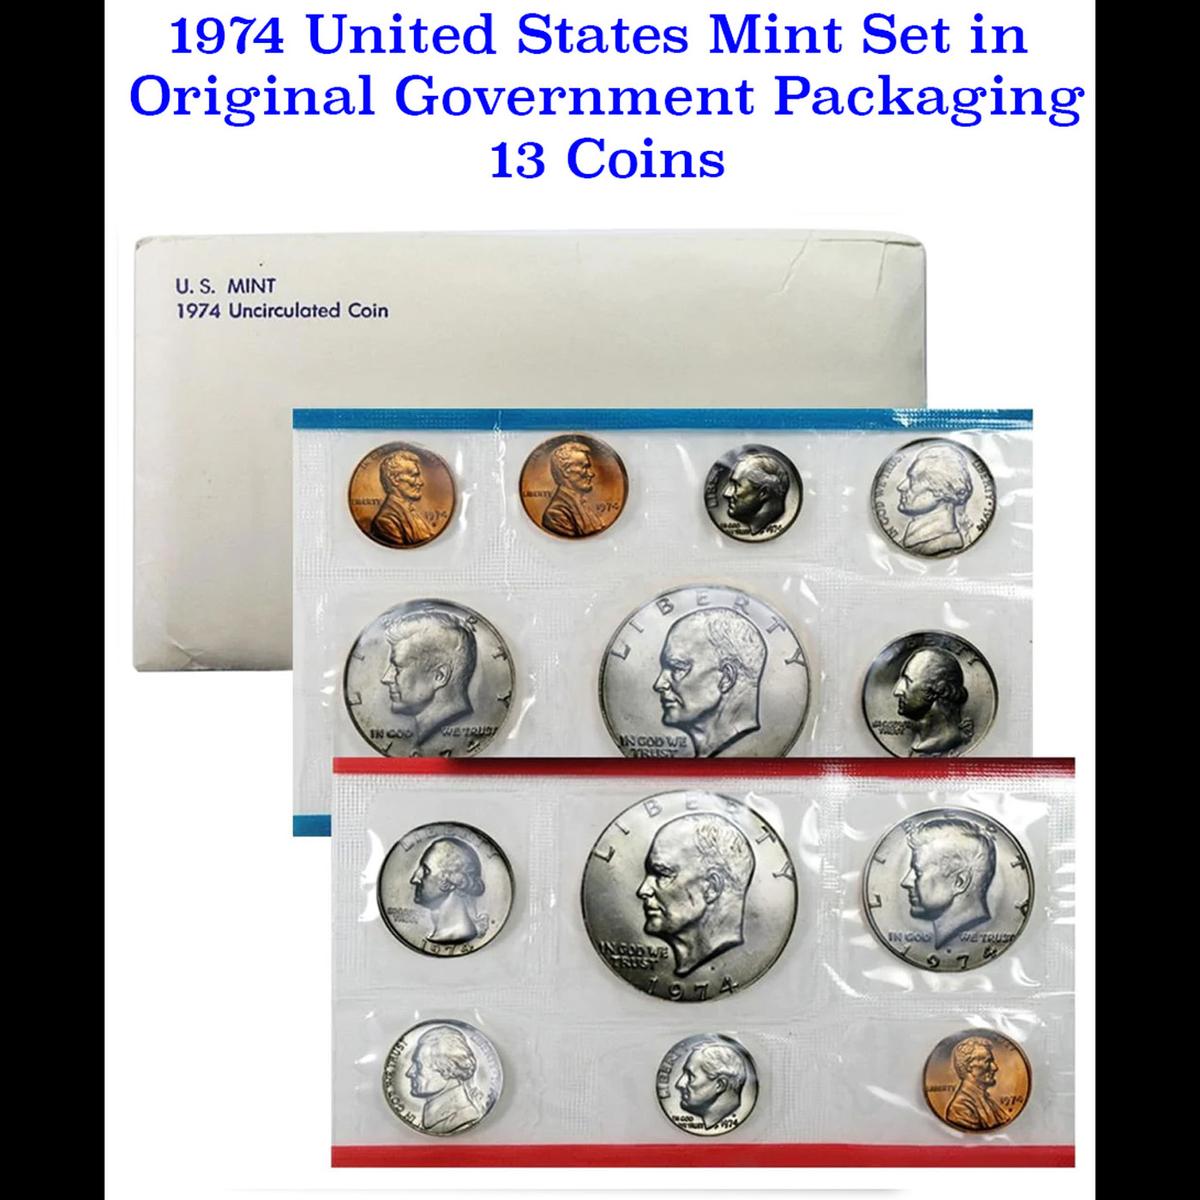 1974 Mint Set in Original Government Packaging, 13 Coins Inside!